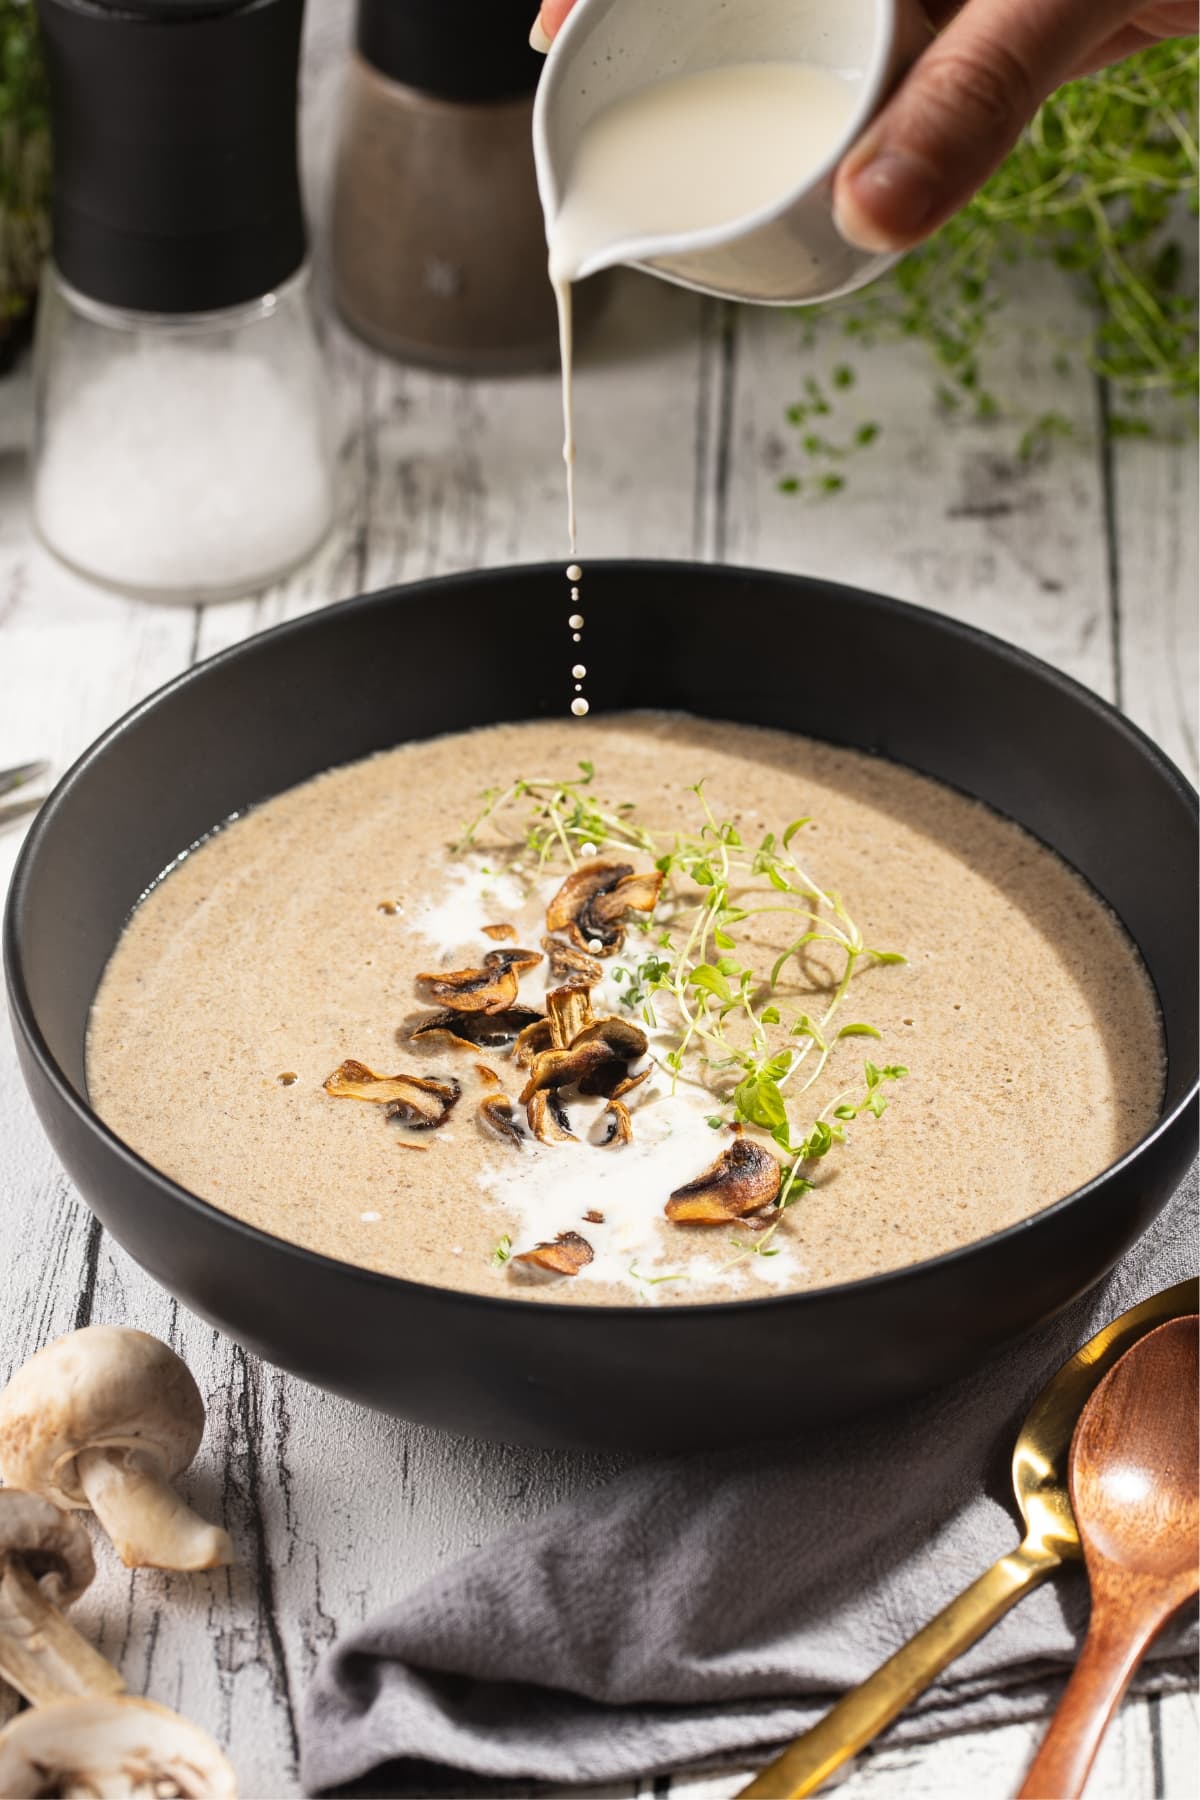 Pouring a White Milk into a Mushroom Soup with Thyme